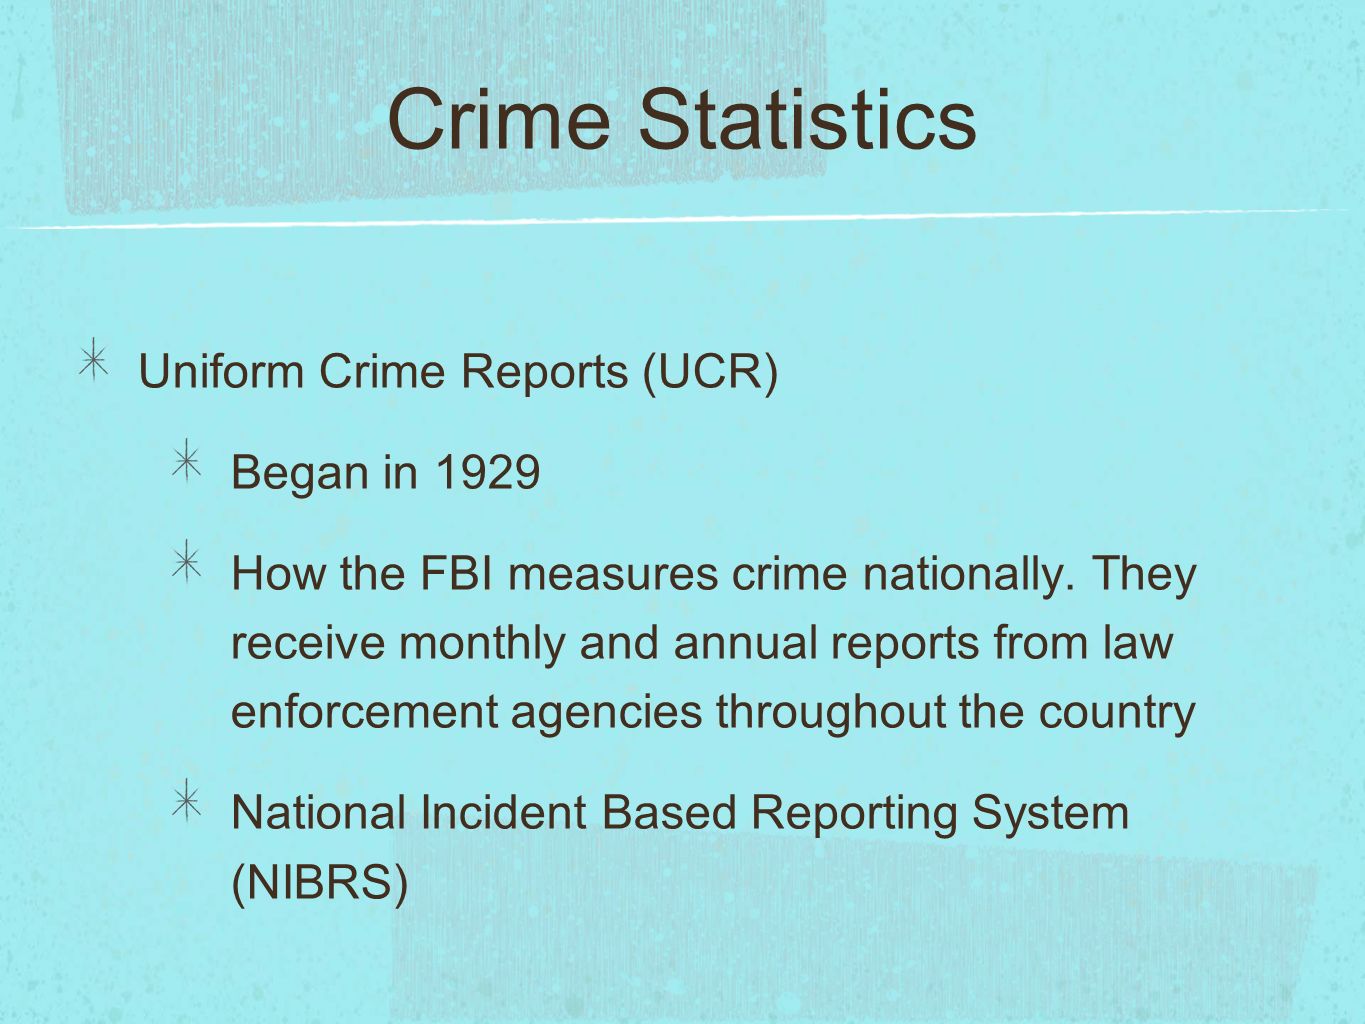 A comparison between the uniform reporting system and the national incident based reporting system